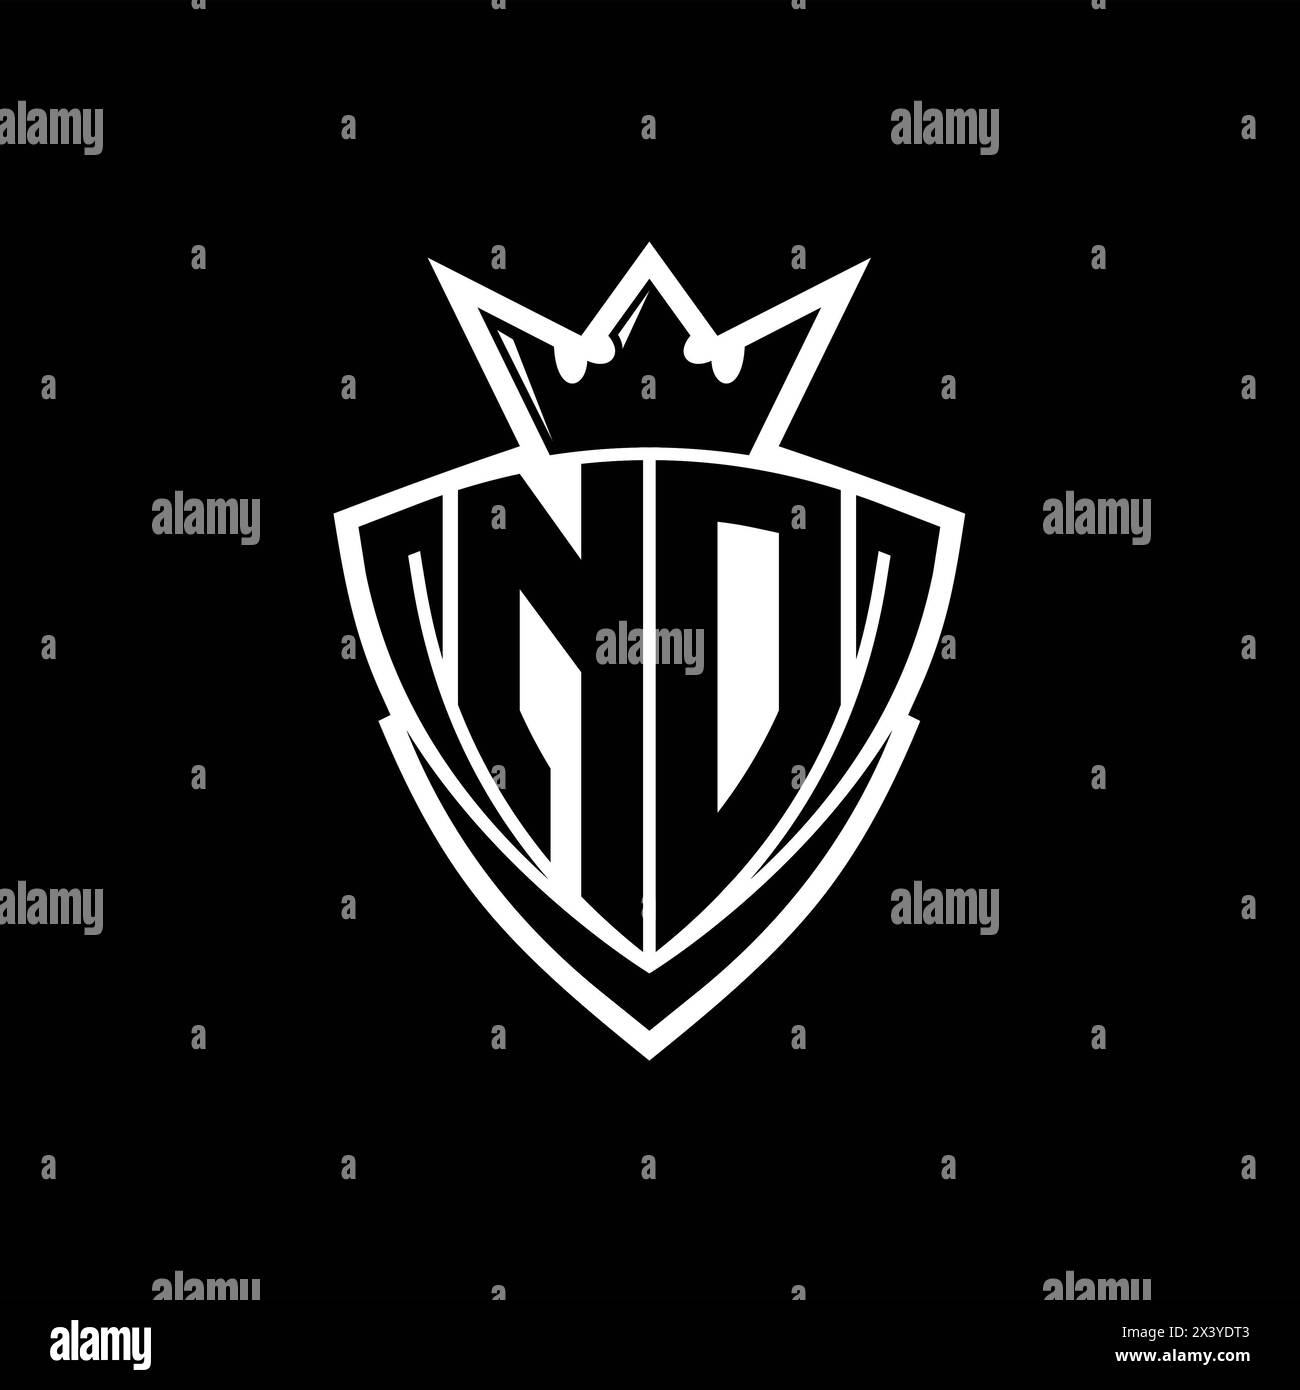 ND Bold letter logo with sharp triangle shield shape with crown inside white outline on black background template design Stock Photo